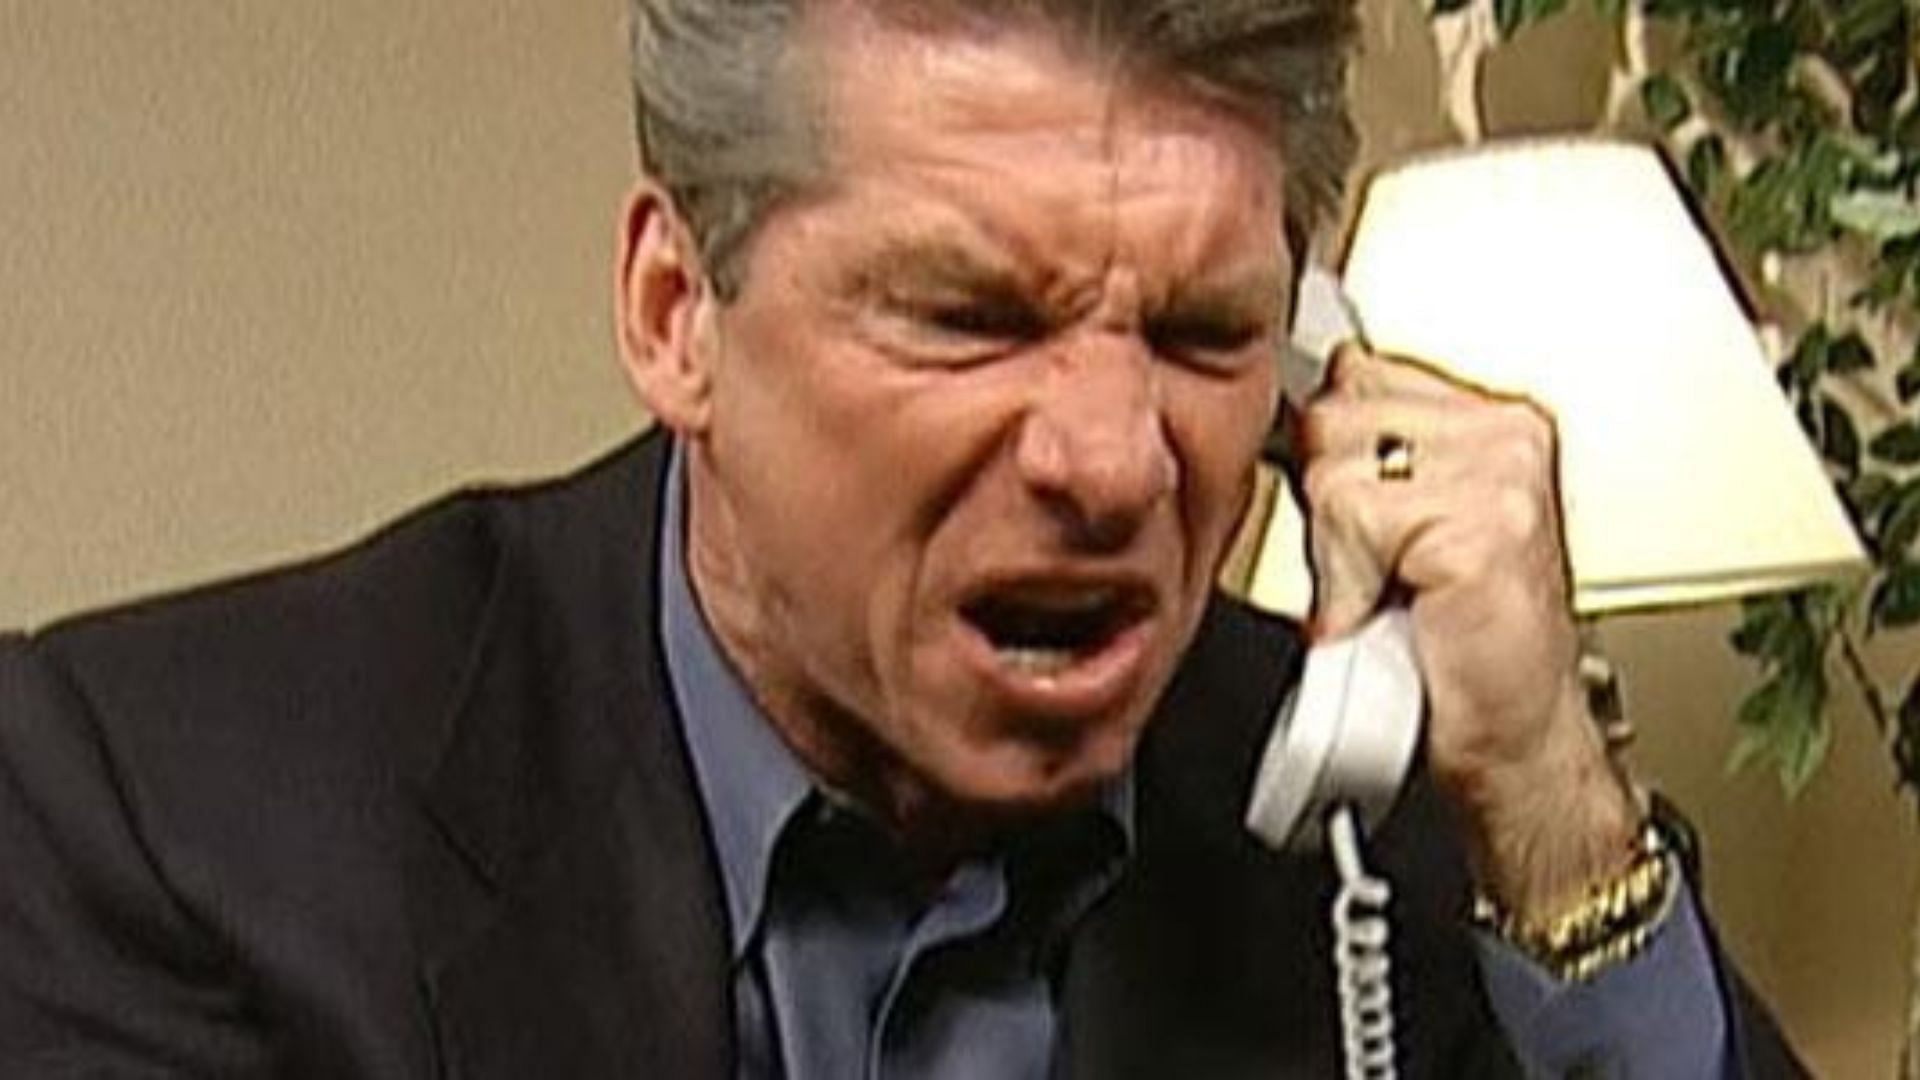 WWE Chairman Vince McMahon was furious with TMZ about the leak